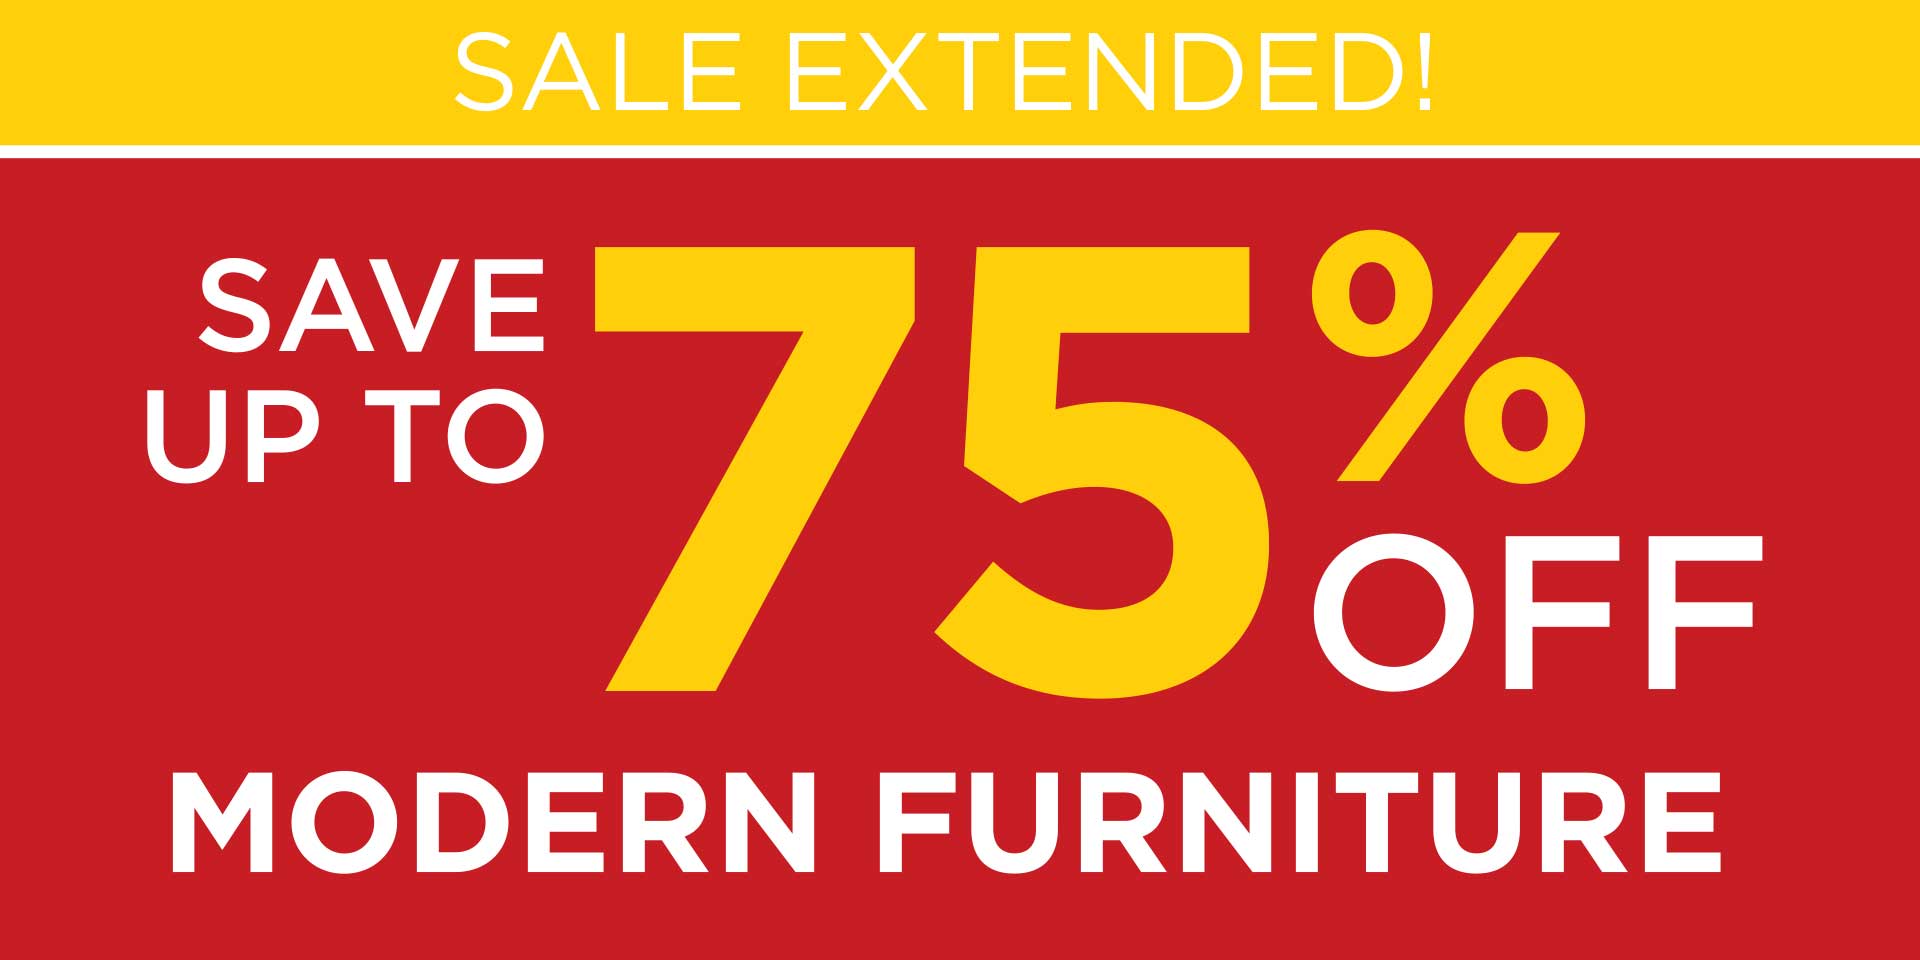 Sale Extended! Save up to 75% off Modern Furniture